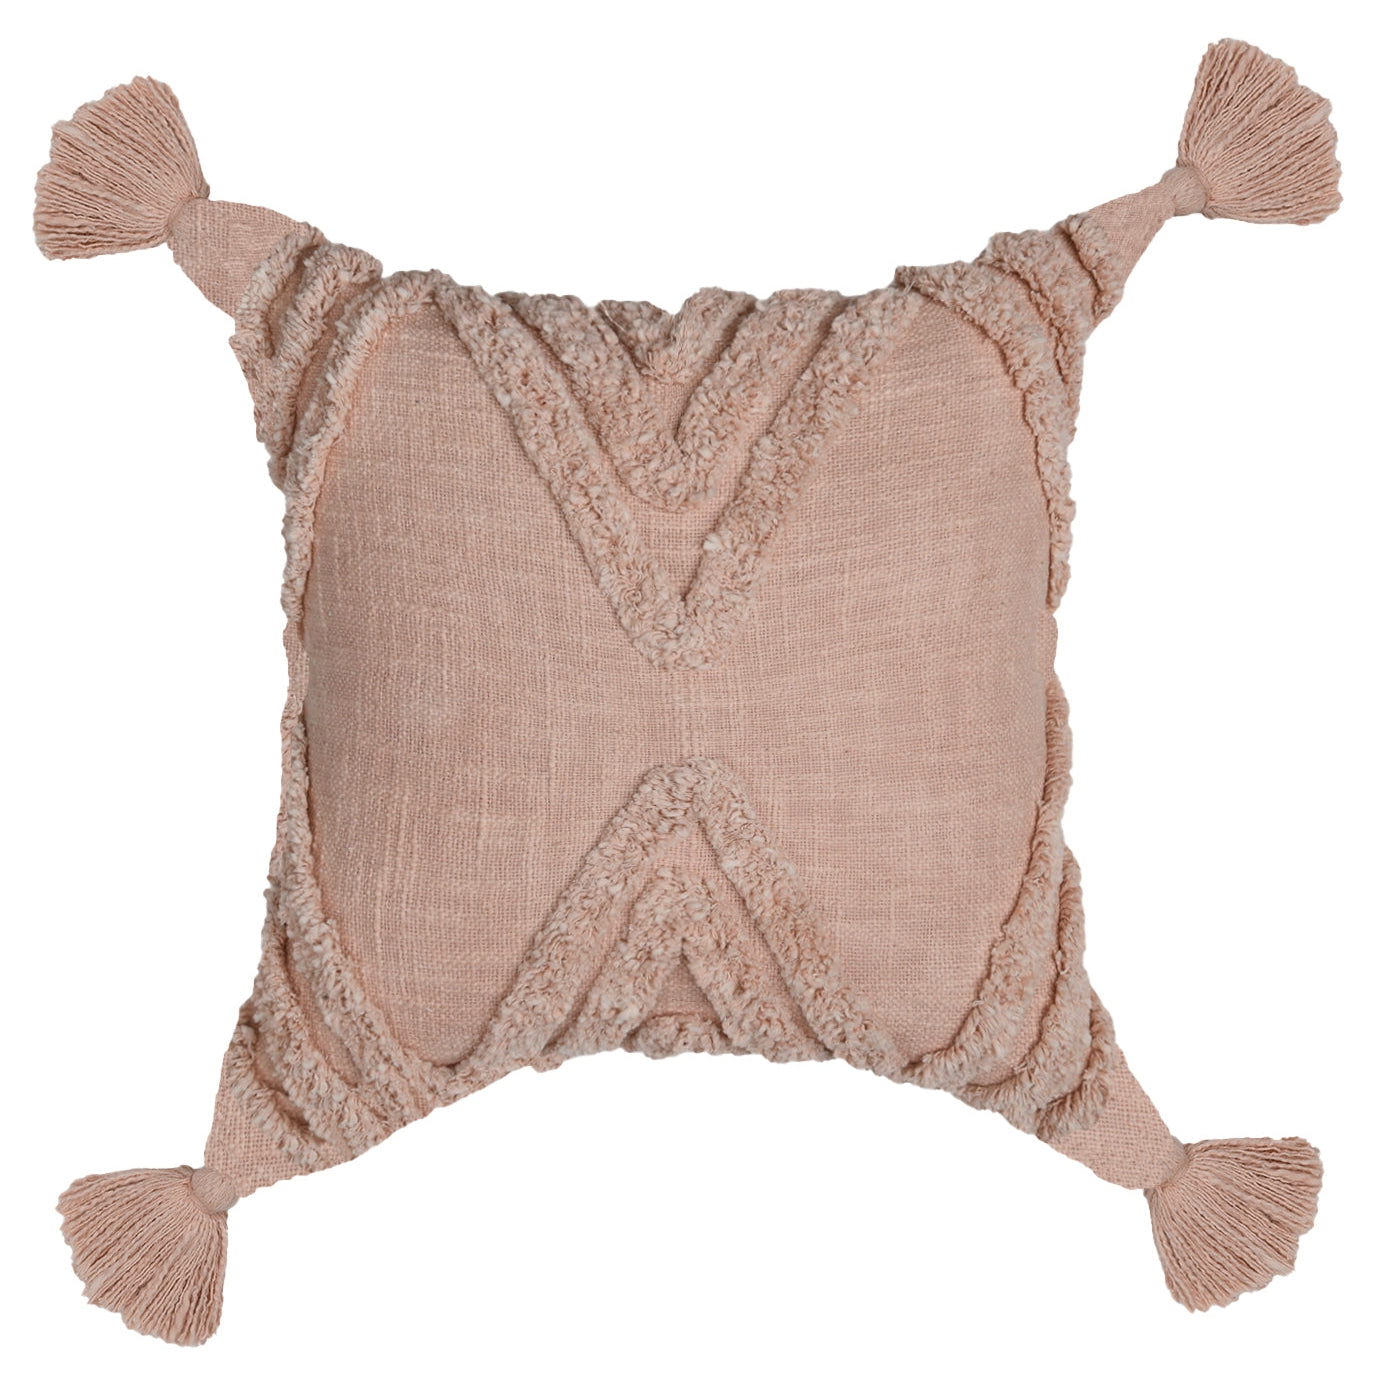 'Cozy Boho Comfort' Hand-Woven Cotton Wool Cushion Cover